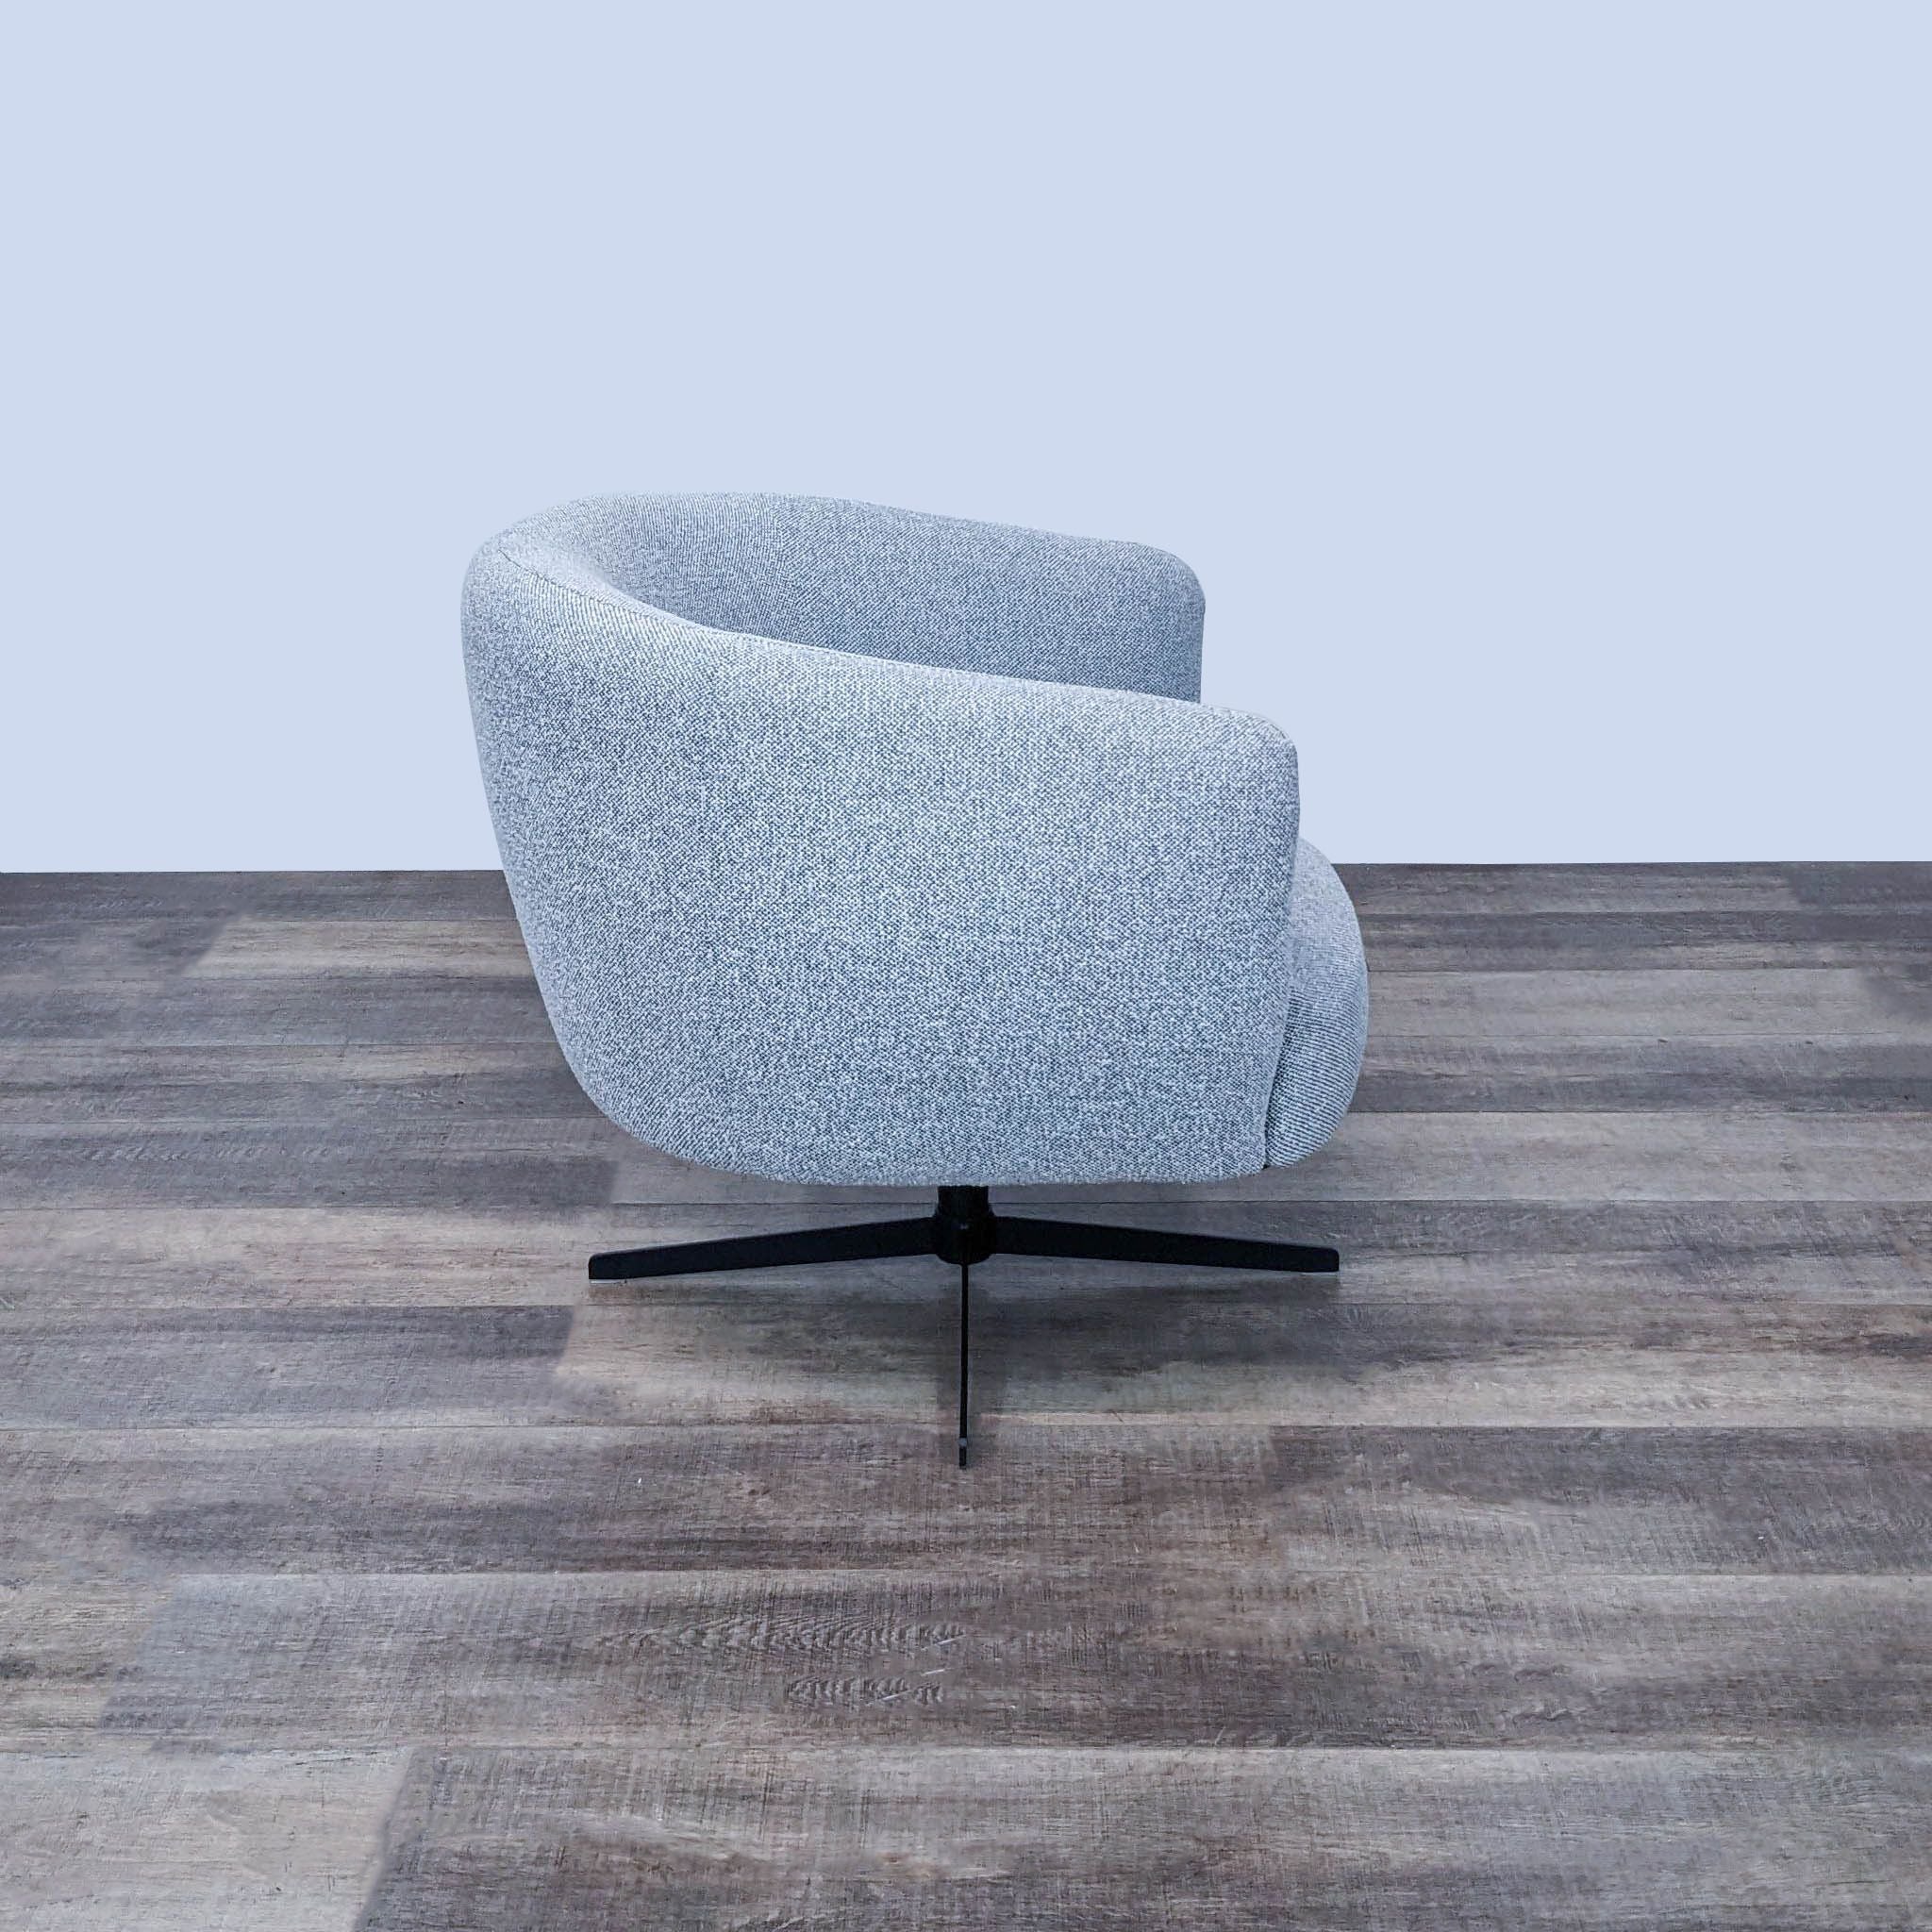 360-degree rotating lounge chair by Target featuring robust metal base and light grey chenille upholstery.